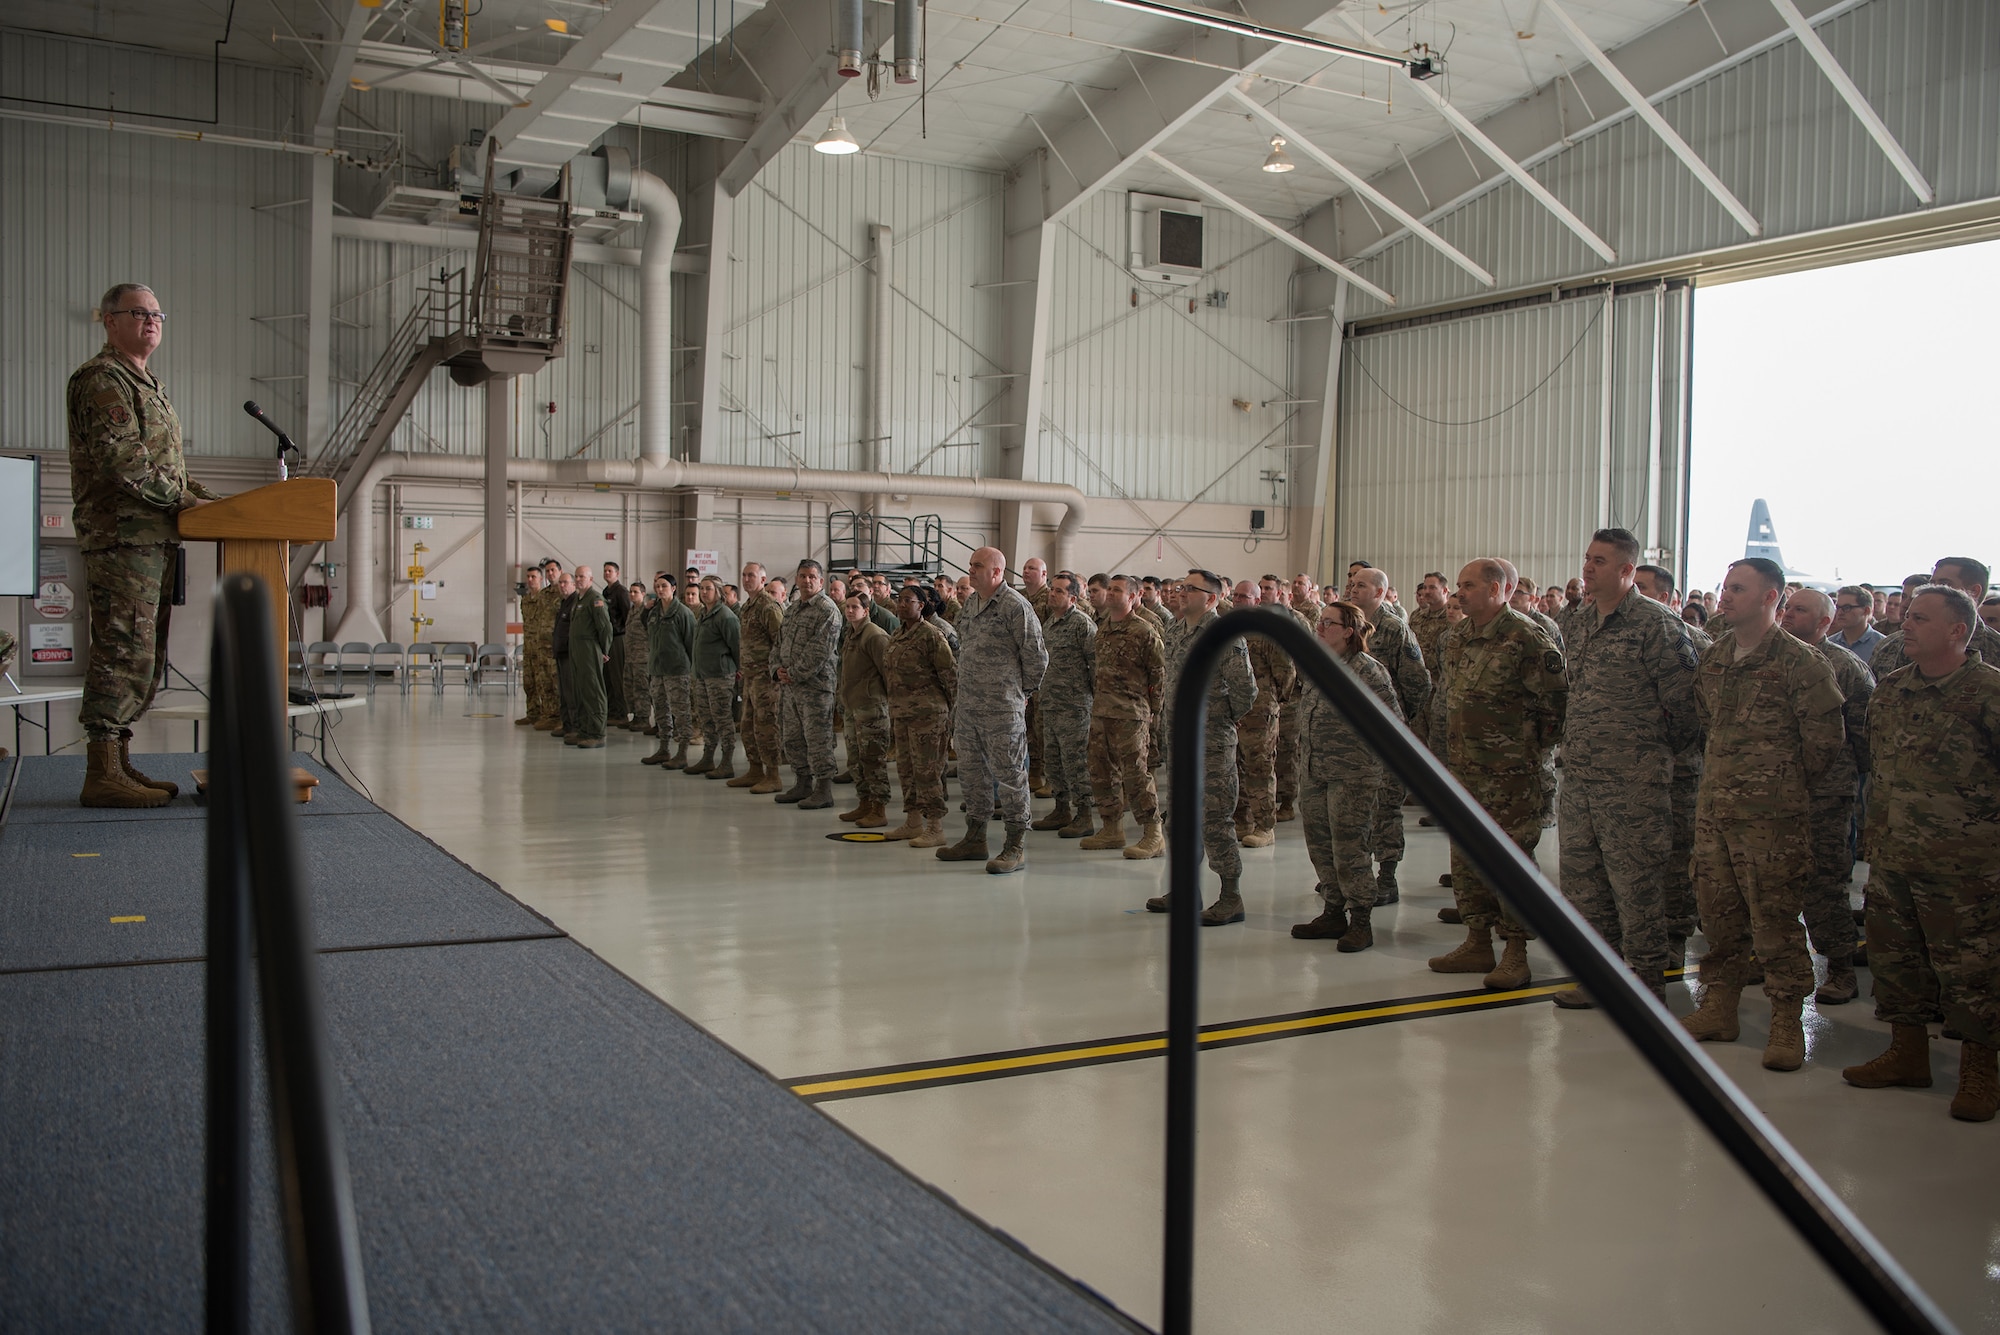 Col. David Mounkes, commander of the 123rd Airlift Wing, speaks to unit members during a ceremony at the Kentucky Air National Guard Base in Louisville, Ky., March 10, 2019. The ceremony, which highlighted the unit’s accomplishments over the past year, concluded with the presentation of the wing’s 18th Air Force Outstanding Unit Award. (U.S. Air National Guard photo by Staff Sgt. Joshua Horton)